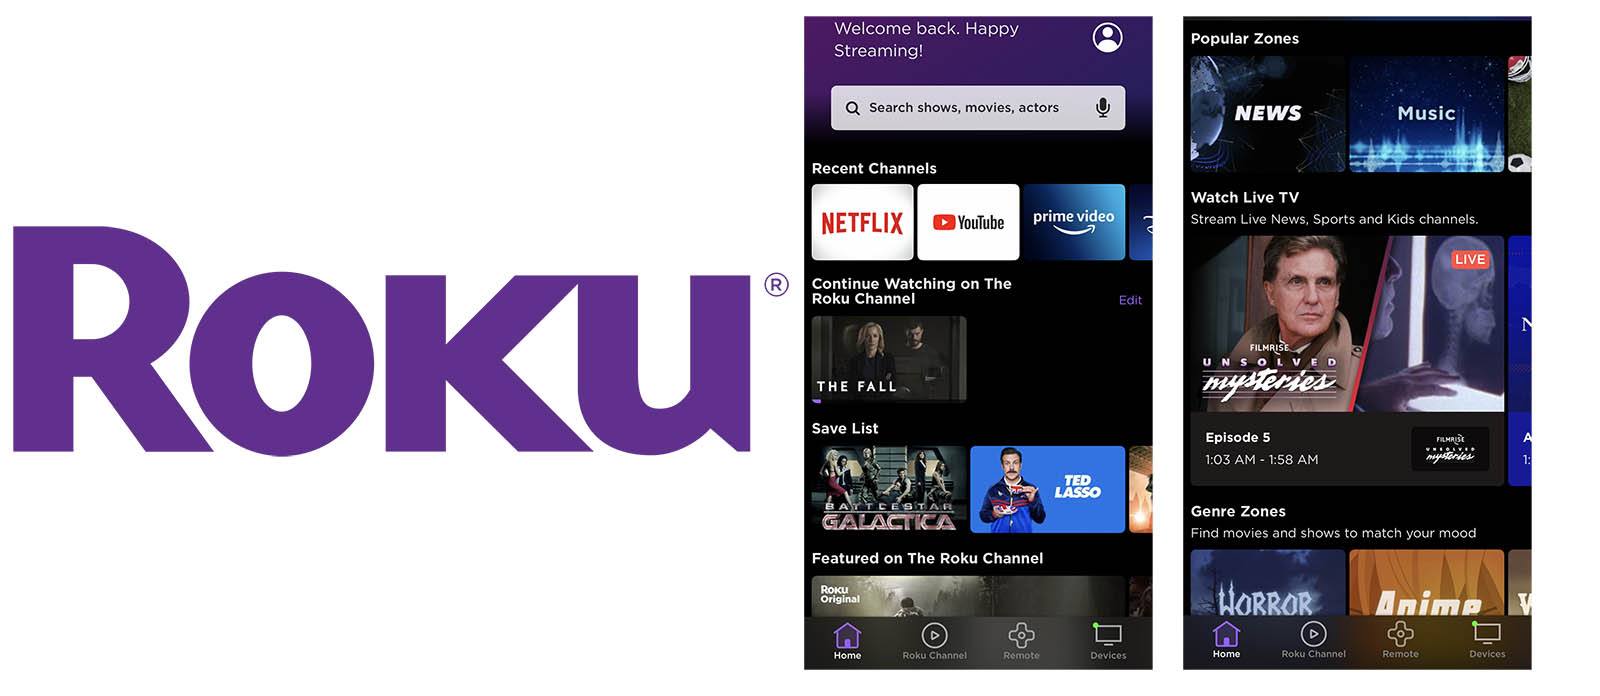 Roku Starts Rolling Out OS 10.5-Focused Updates to Android Mobile App on Oct. 15th